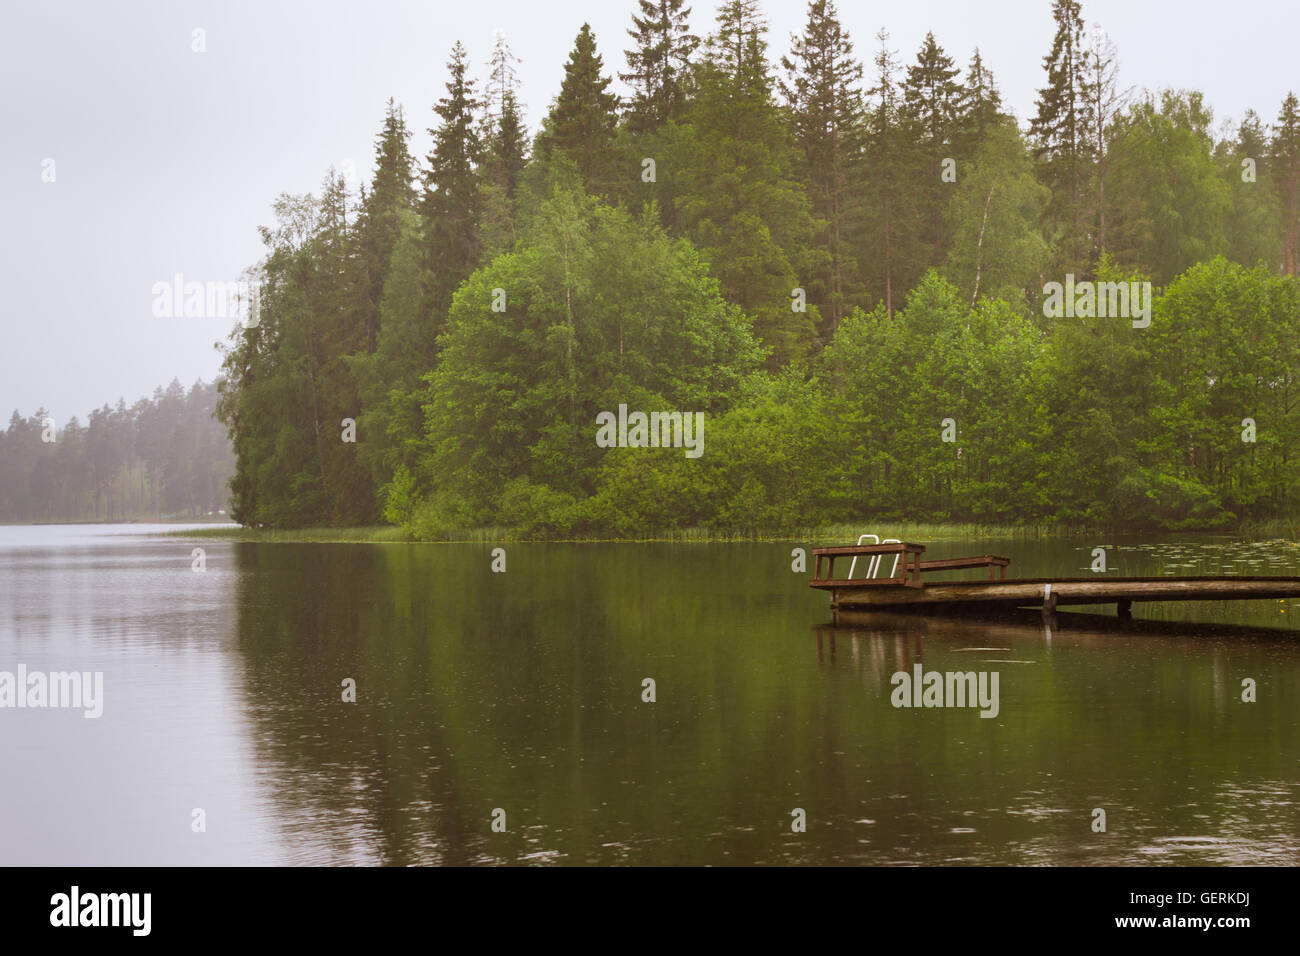 Cloudy summer day on the lake. Wooden boat pier overlooking the water and island. Area for summer camping in the woods. Finland Stock Photo